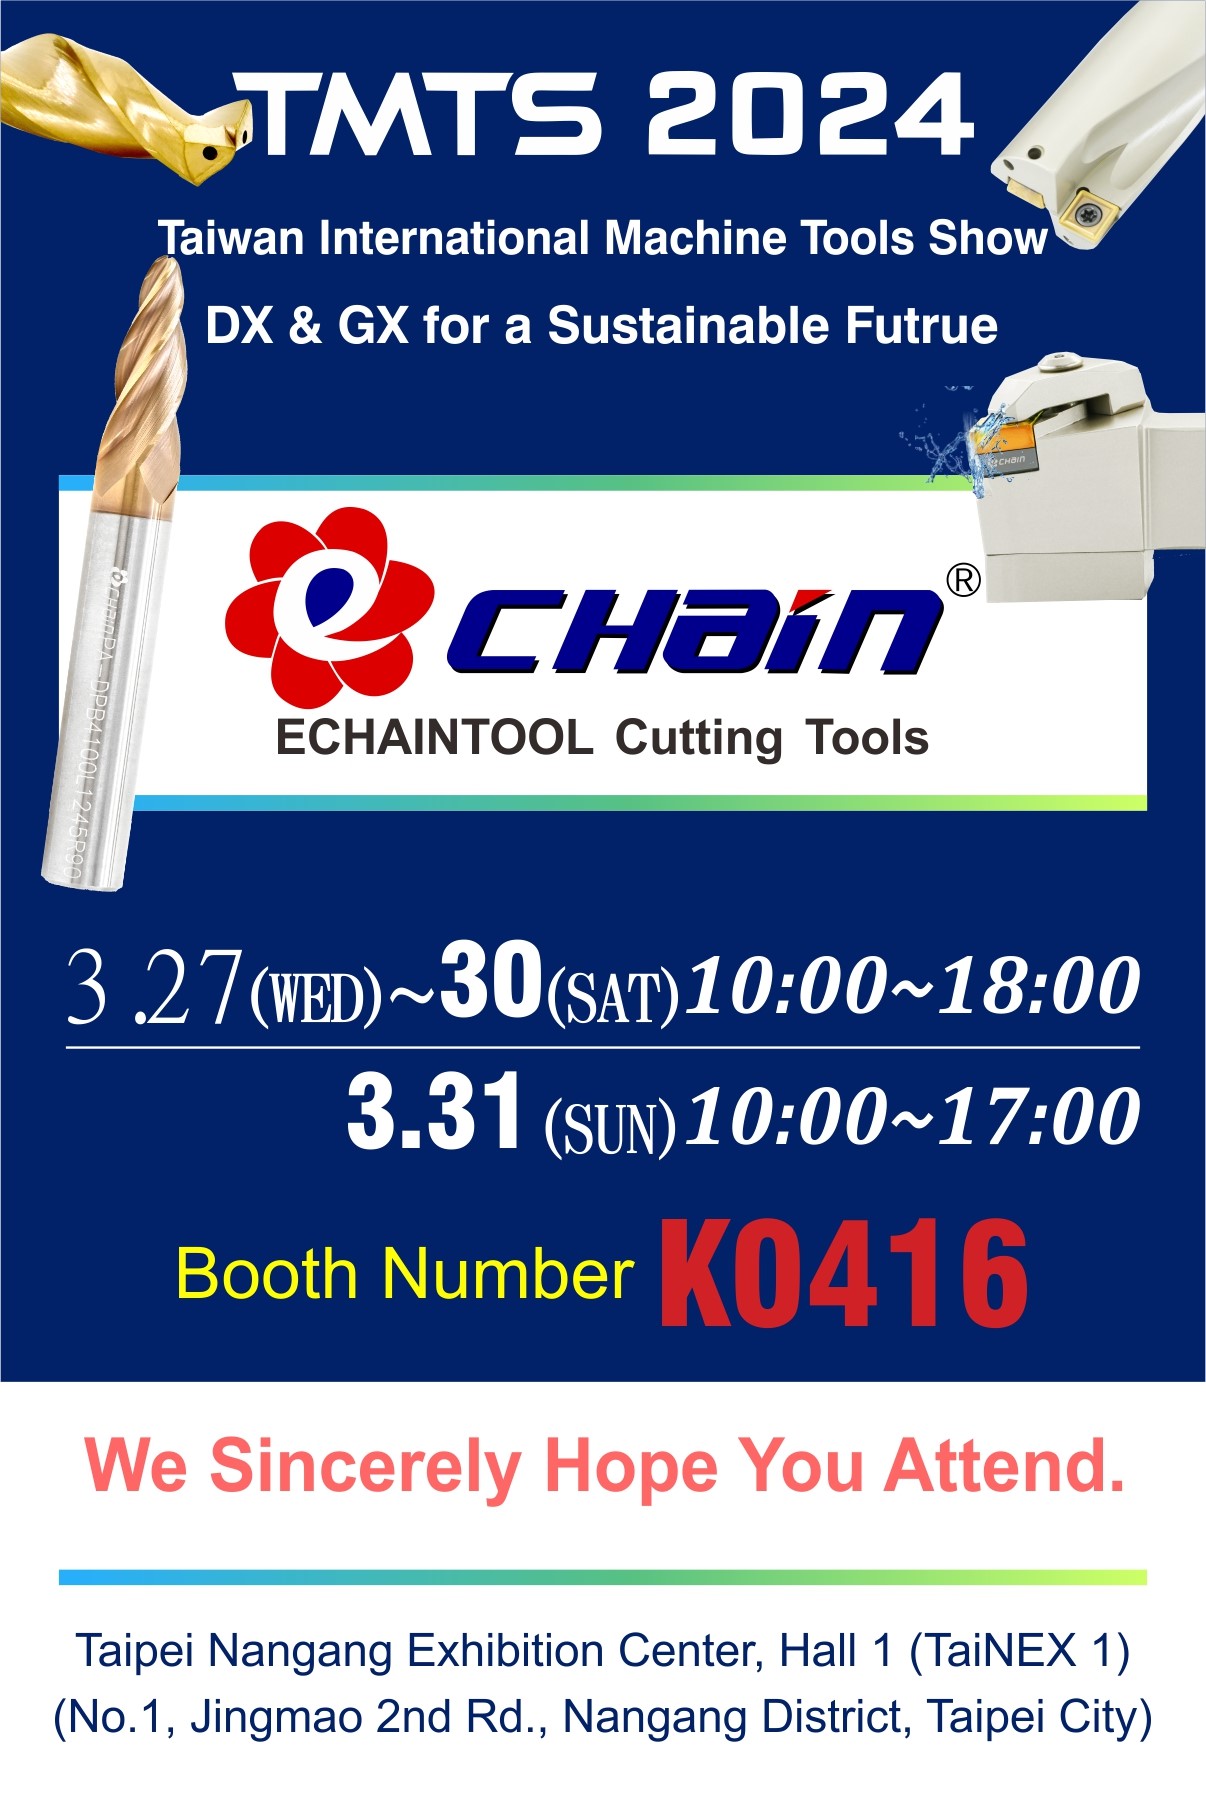 TMTS 2024 Machine Tool Show with Echaintool in Taiwan